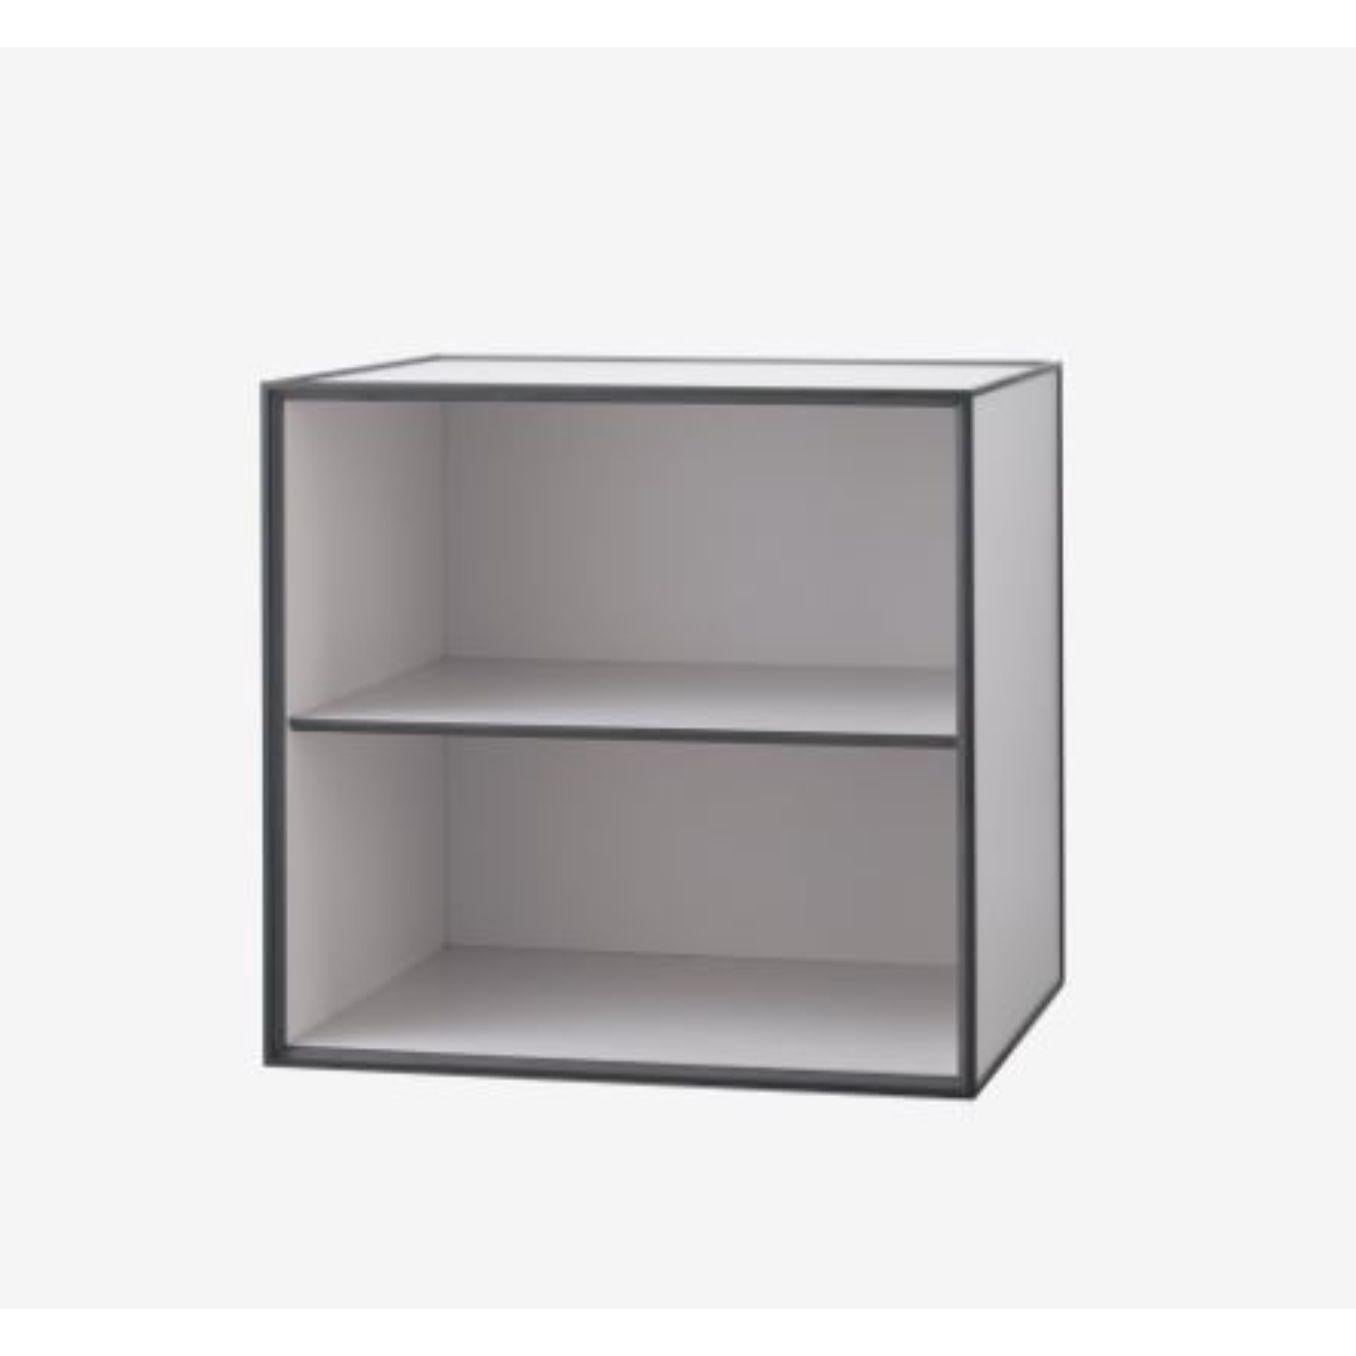 49 light grey frame box with shelf by Lassen
Dimensions: D 49 x W 42 x H 49 cm 
Materials: Finér, Melamin, Melamin, Melamine, metal, veneer, ash
Also available in different colours and dimensions.
Weight: 14 Kg


By Lassen is a Danish design